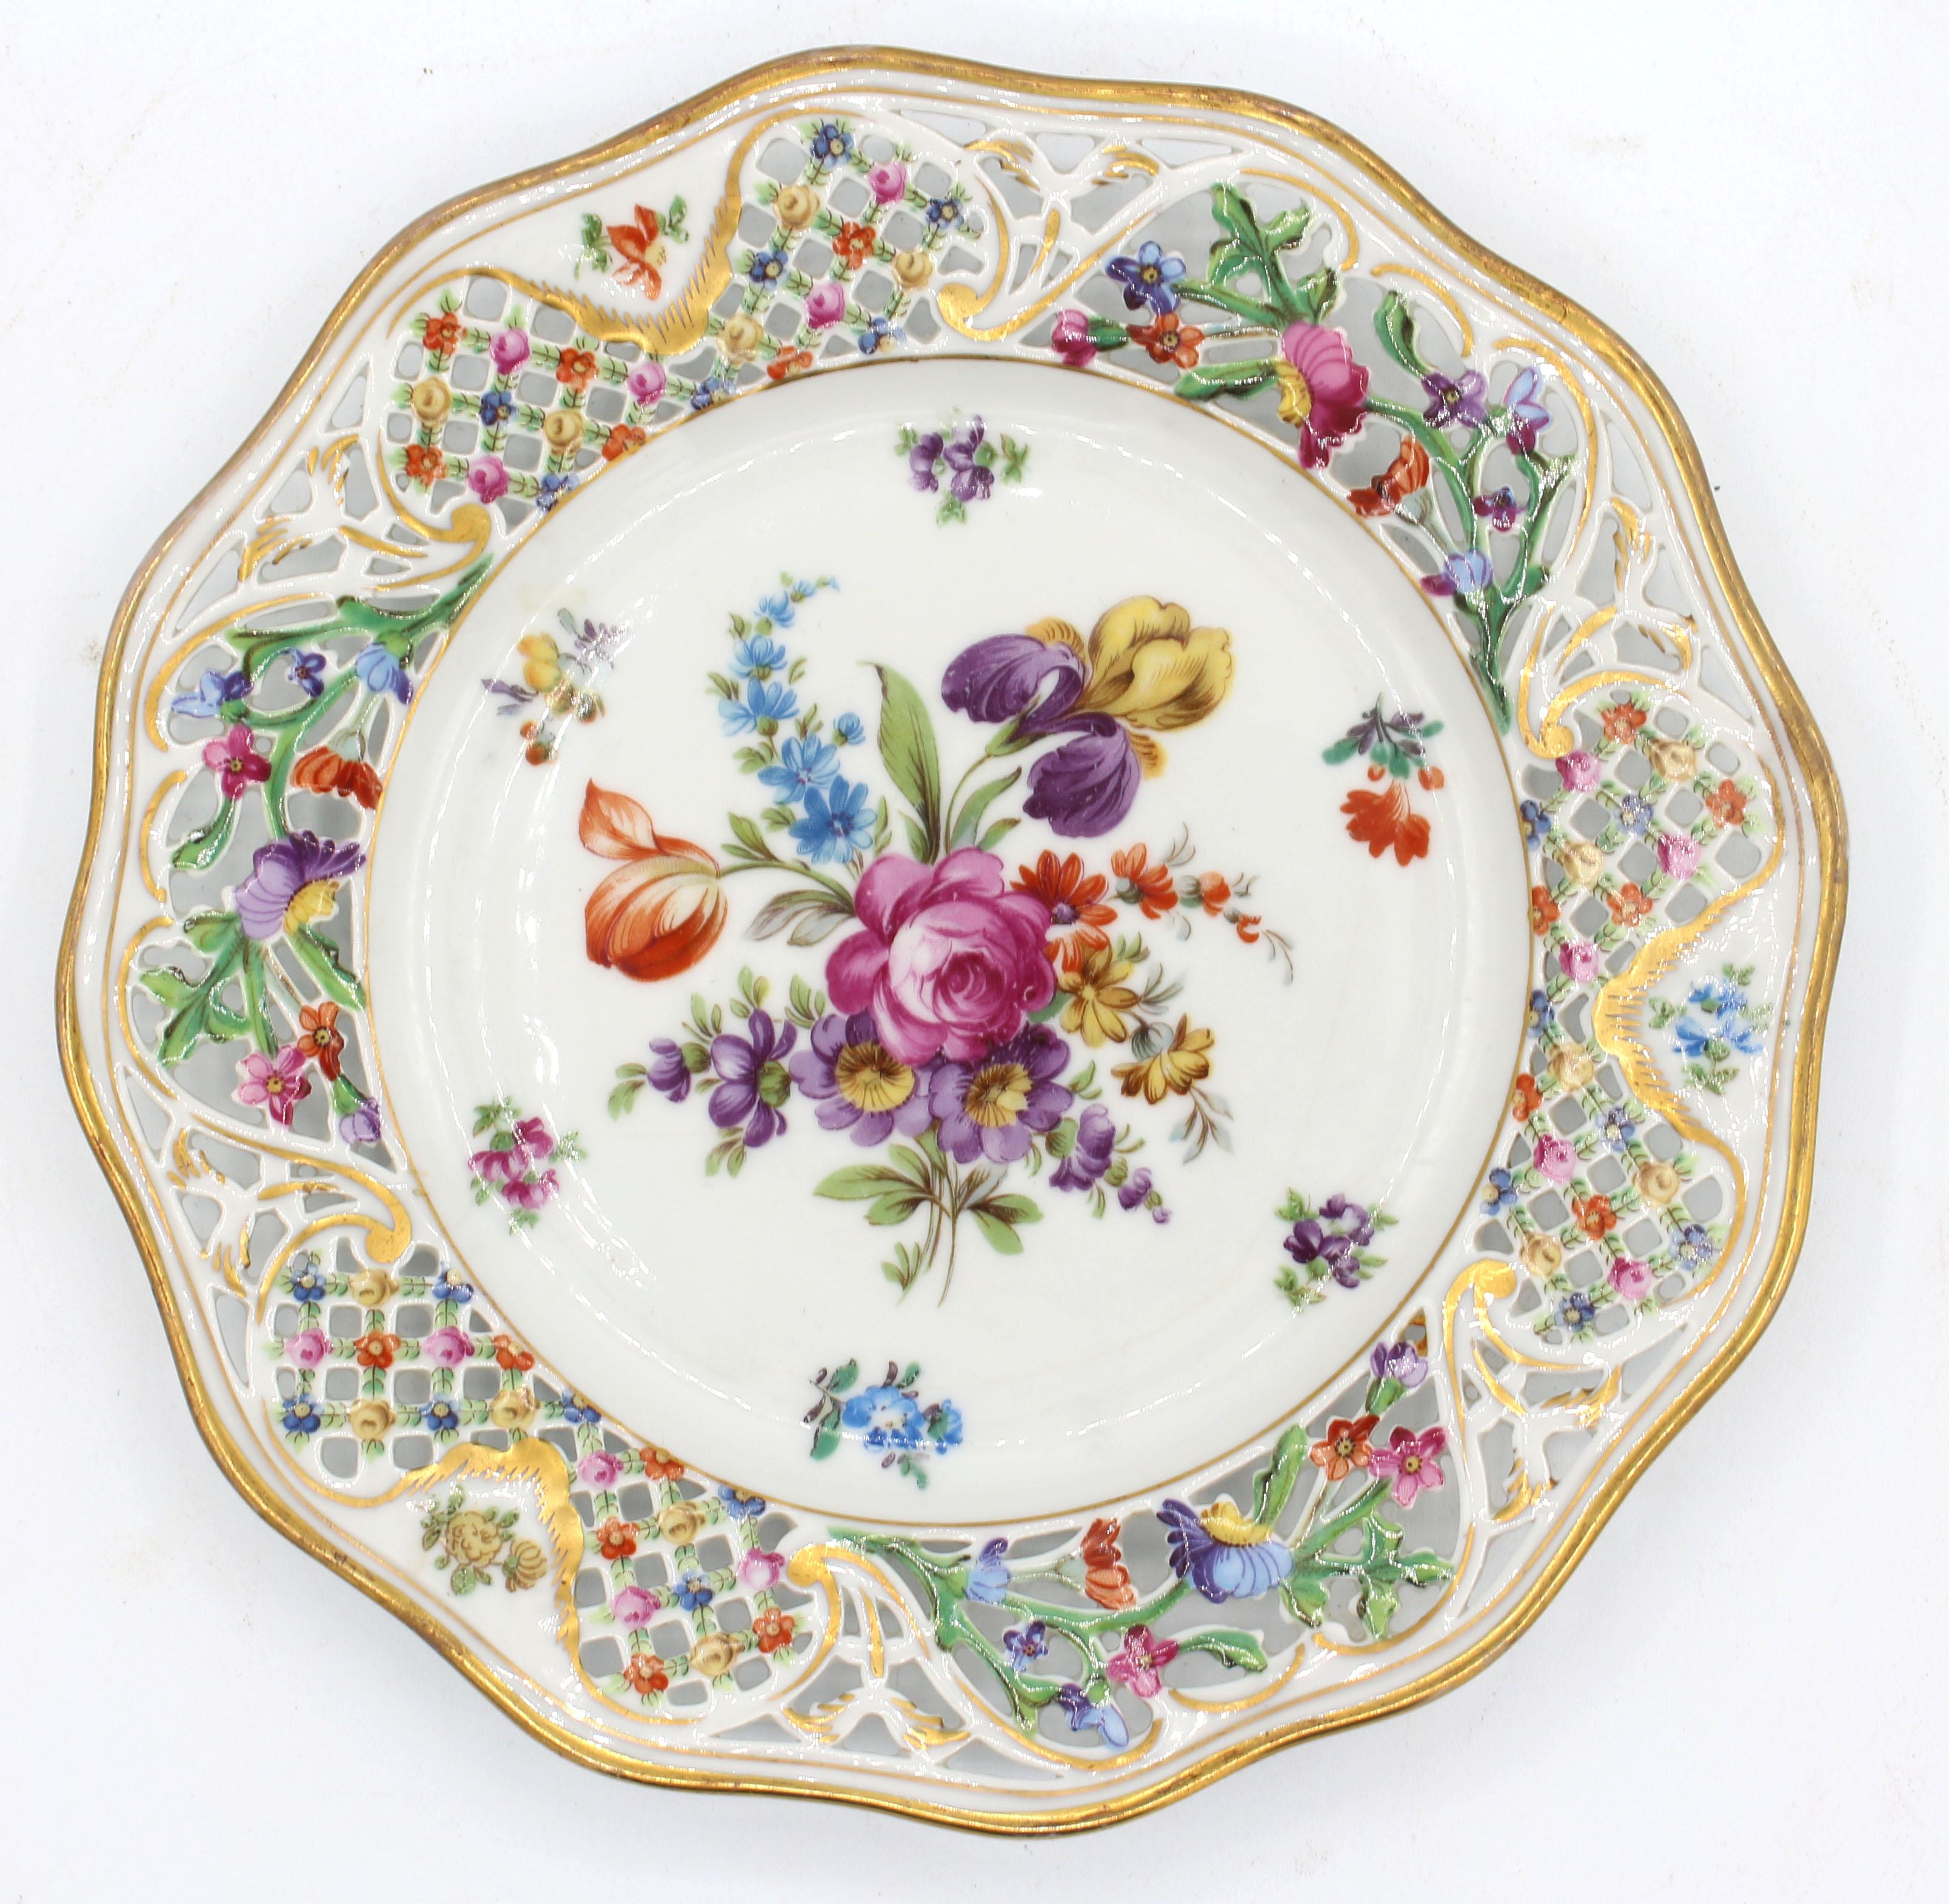 1932-1944 set of 8 Dessert Plates by Schumann, Dresden & Bavaria periods. Superbly handpainted floral sprays with bold reticulated undulating wide floral borders. One glaze line.
8 3/8